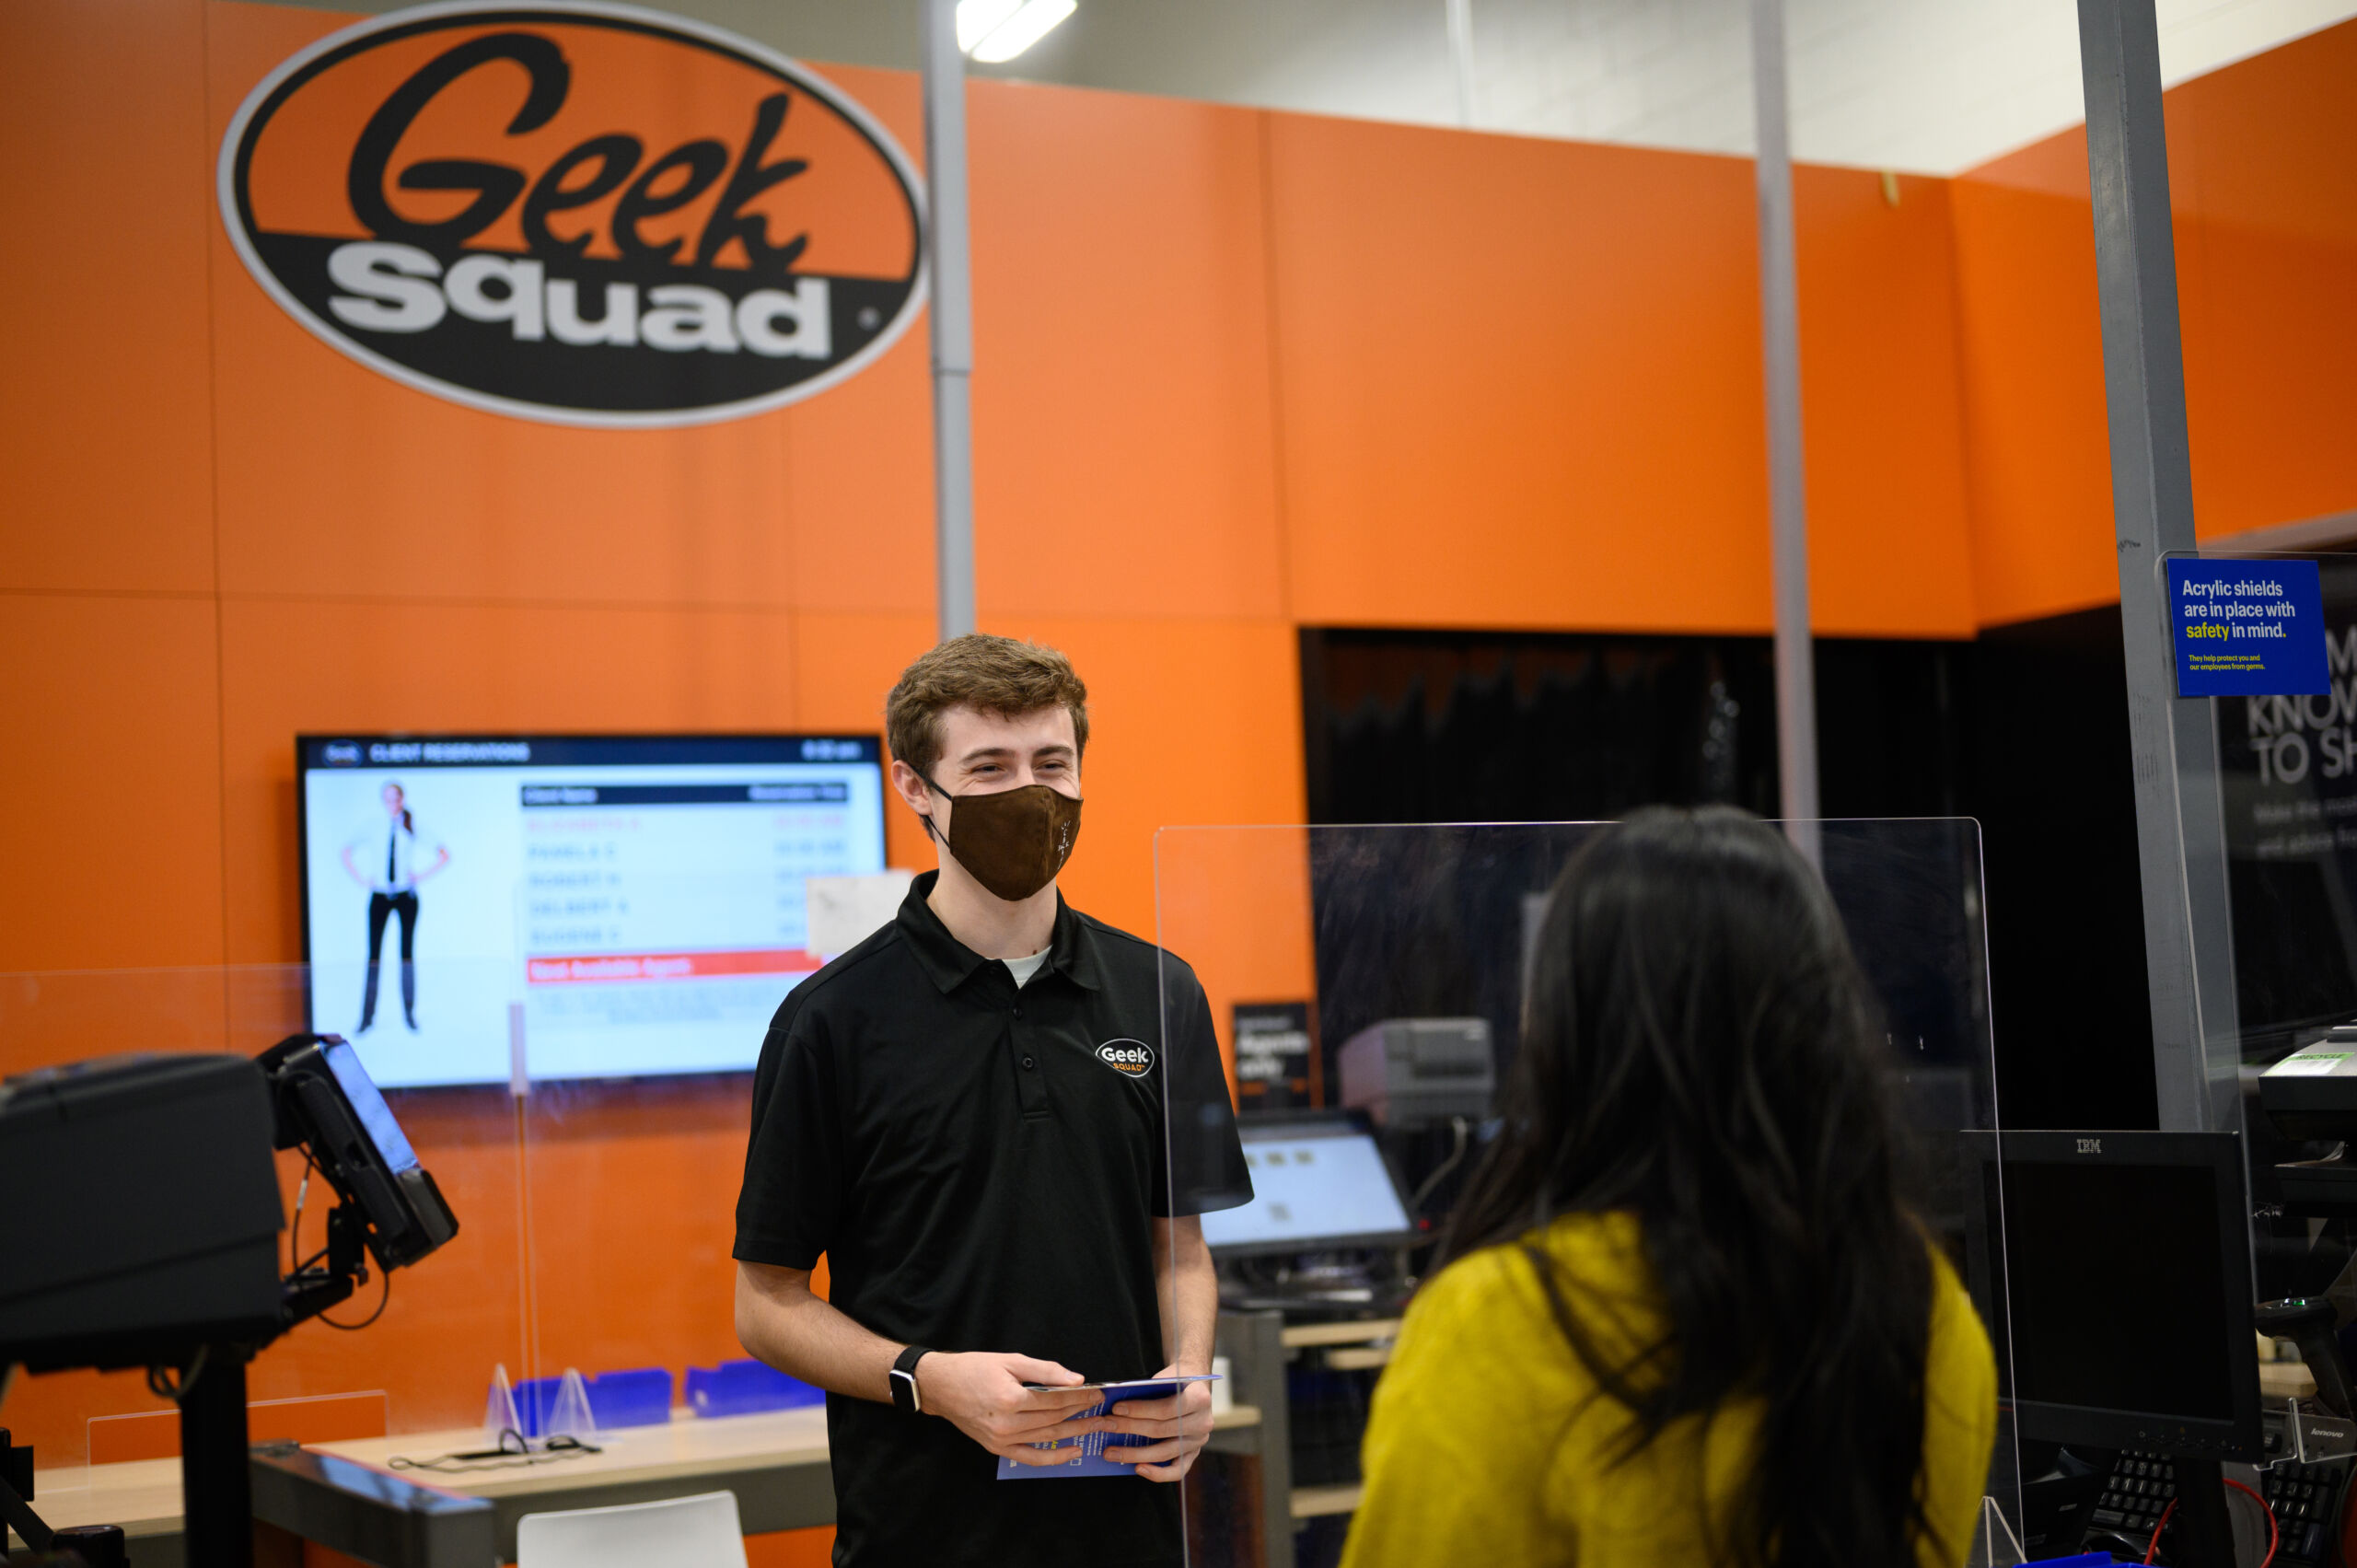 Geek Squad Agent helping customer - Best Buy Corporate News and Information